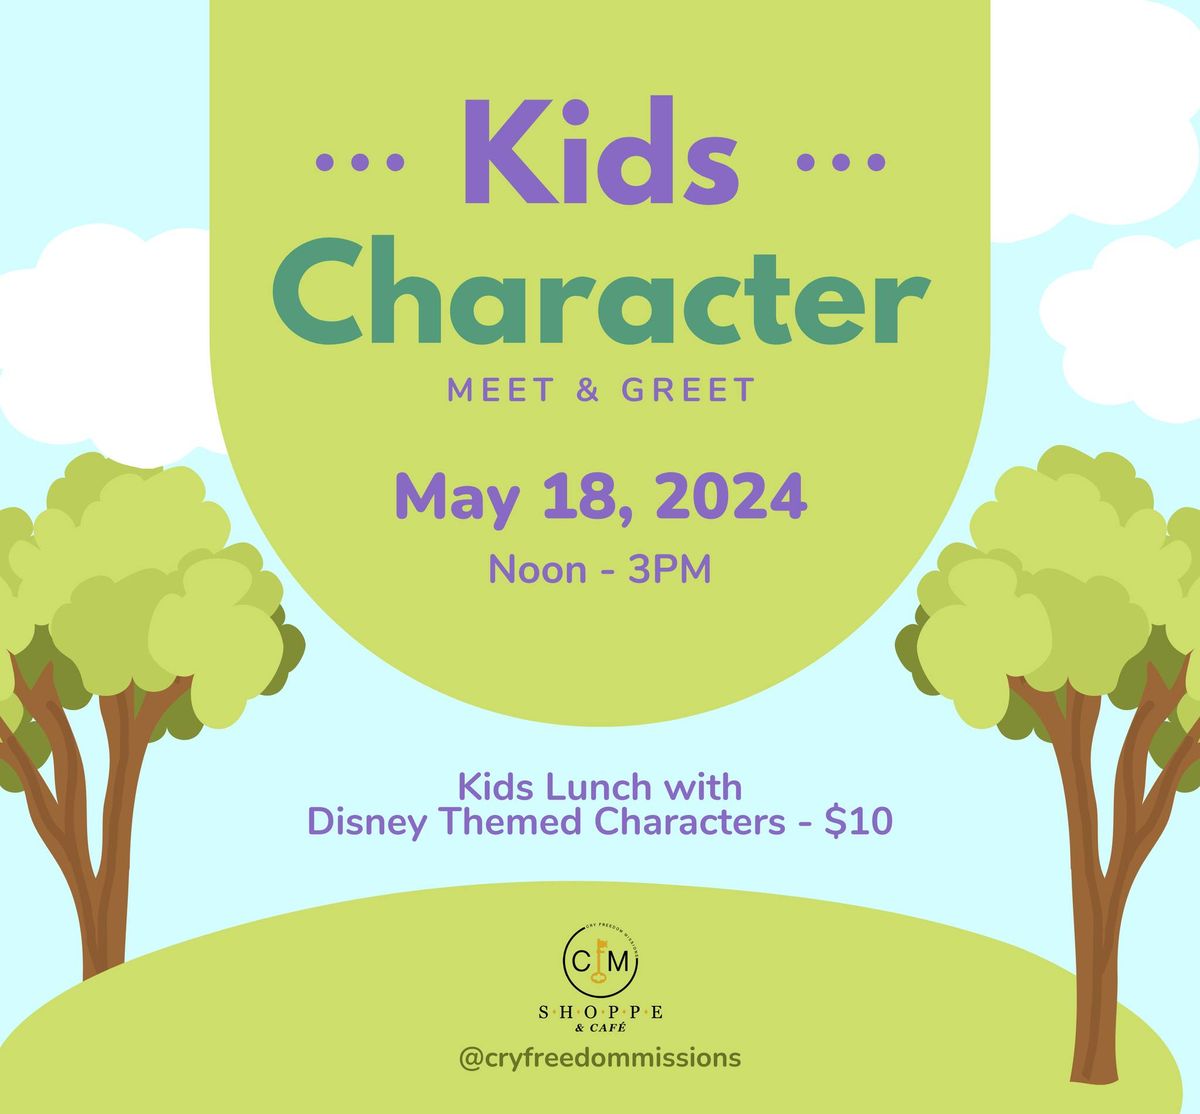 Kids Characters Meet & Greet and Lunch